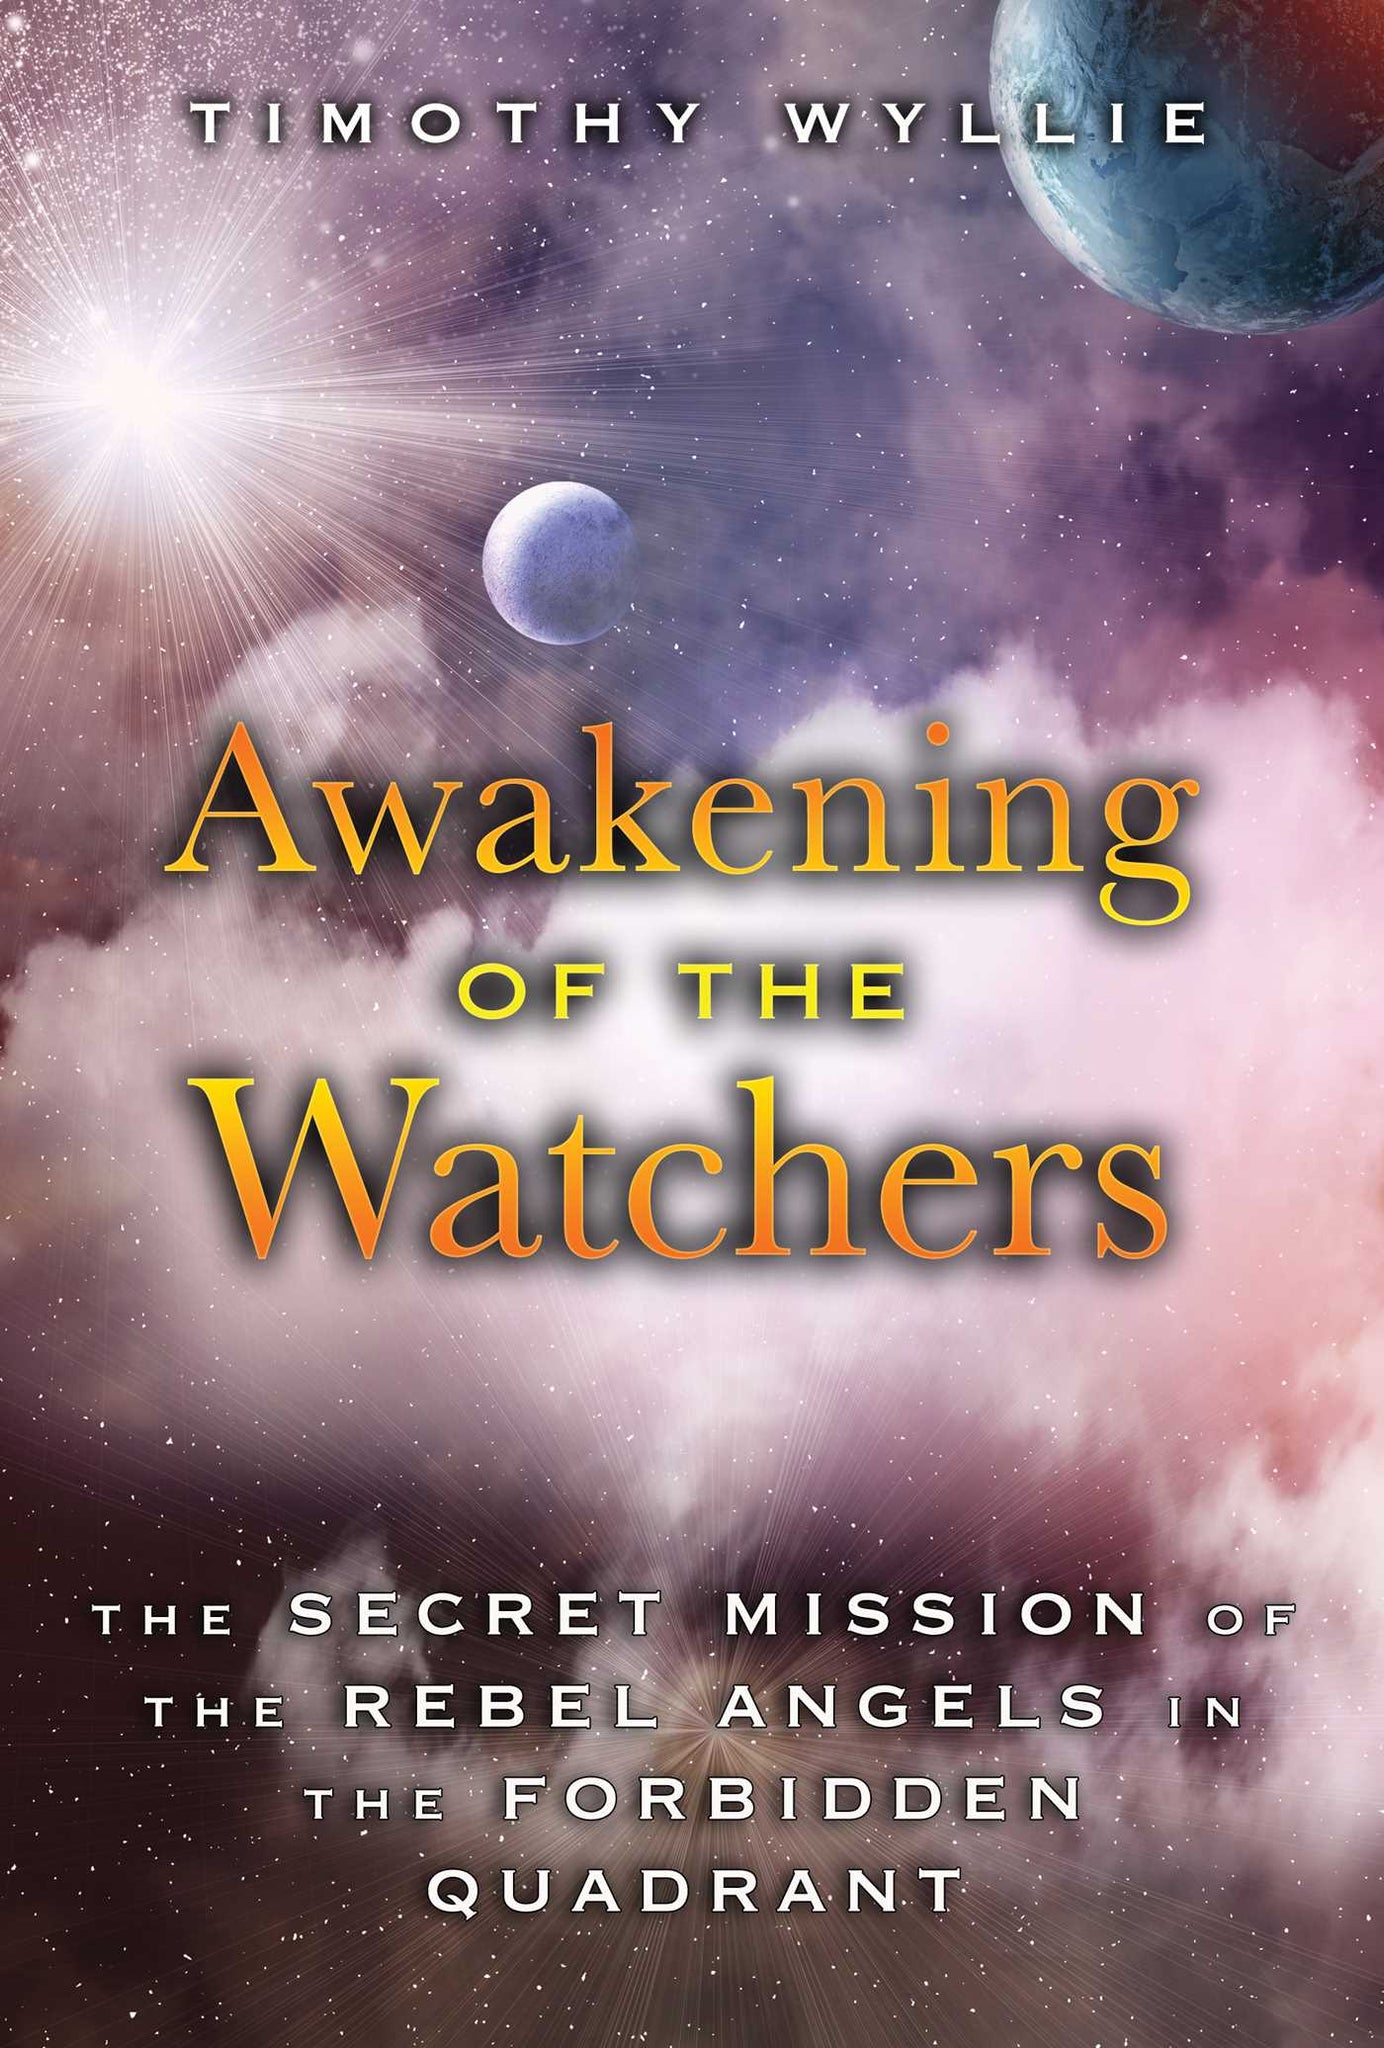 Awakening of the Watchers : The Secret Mission of the Rebel Angels in the Forbidden Quadrant